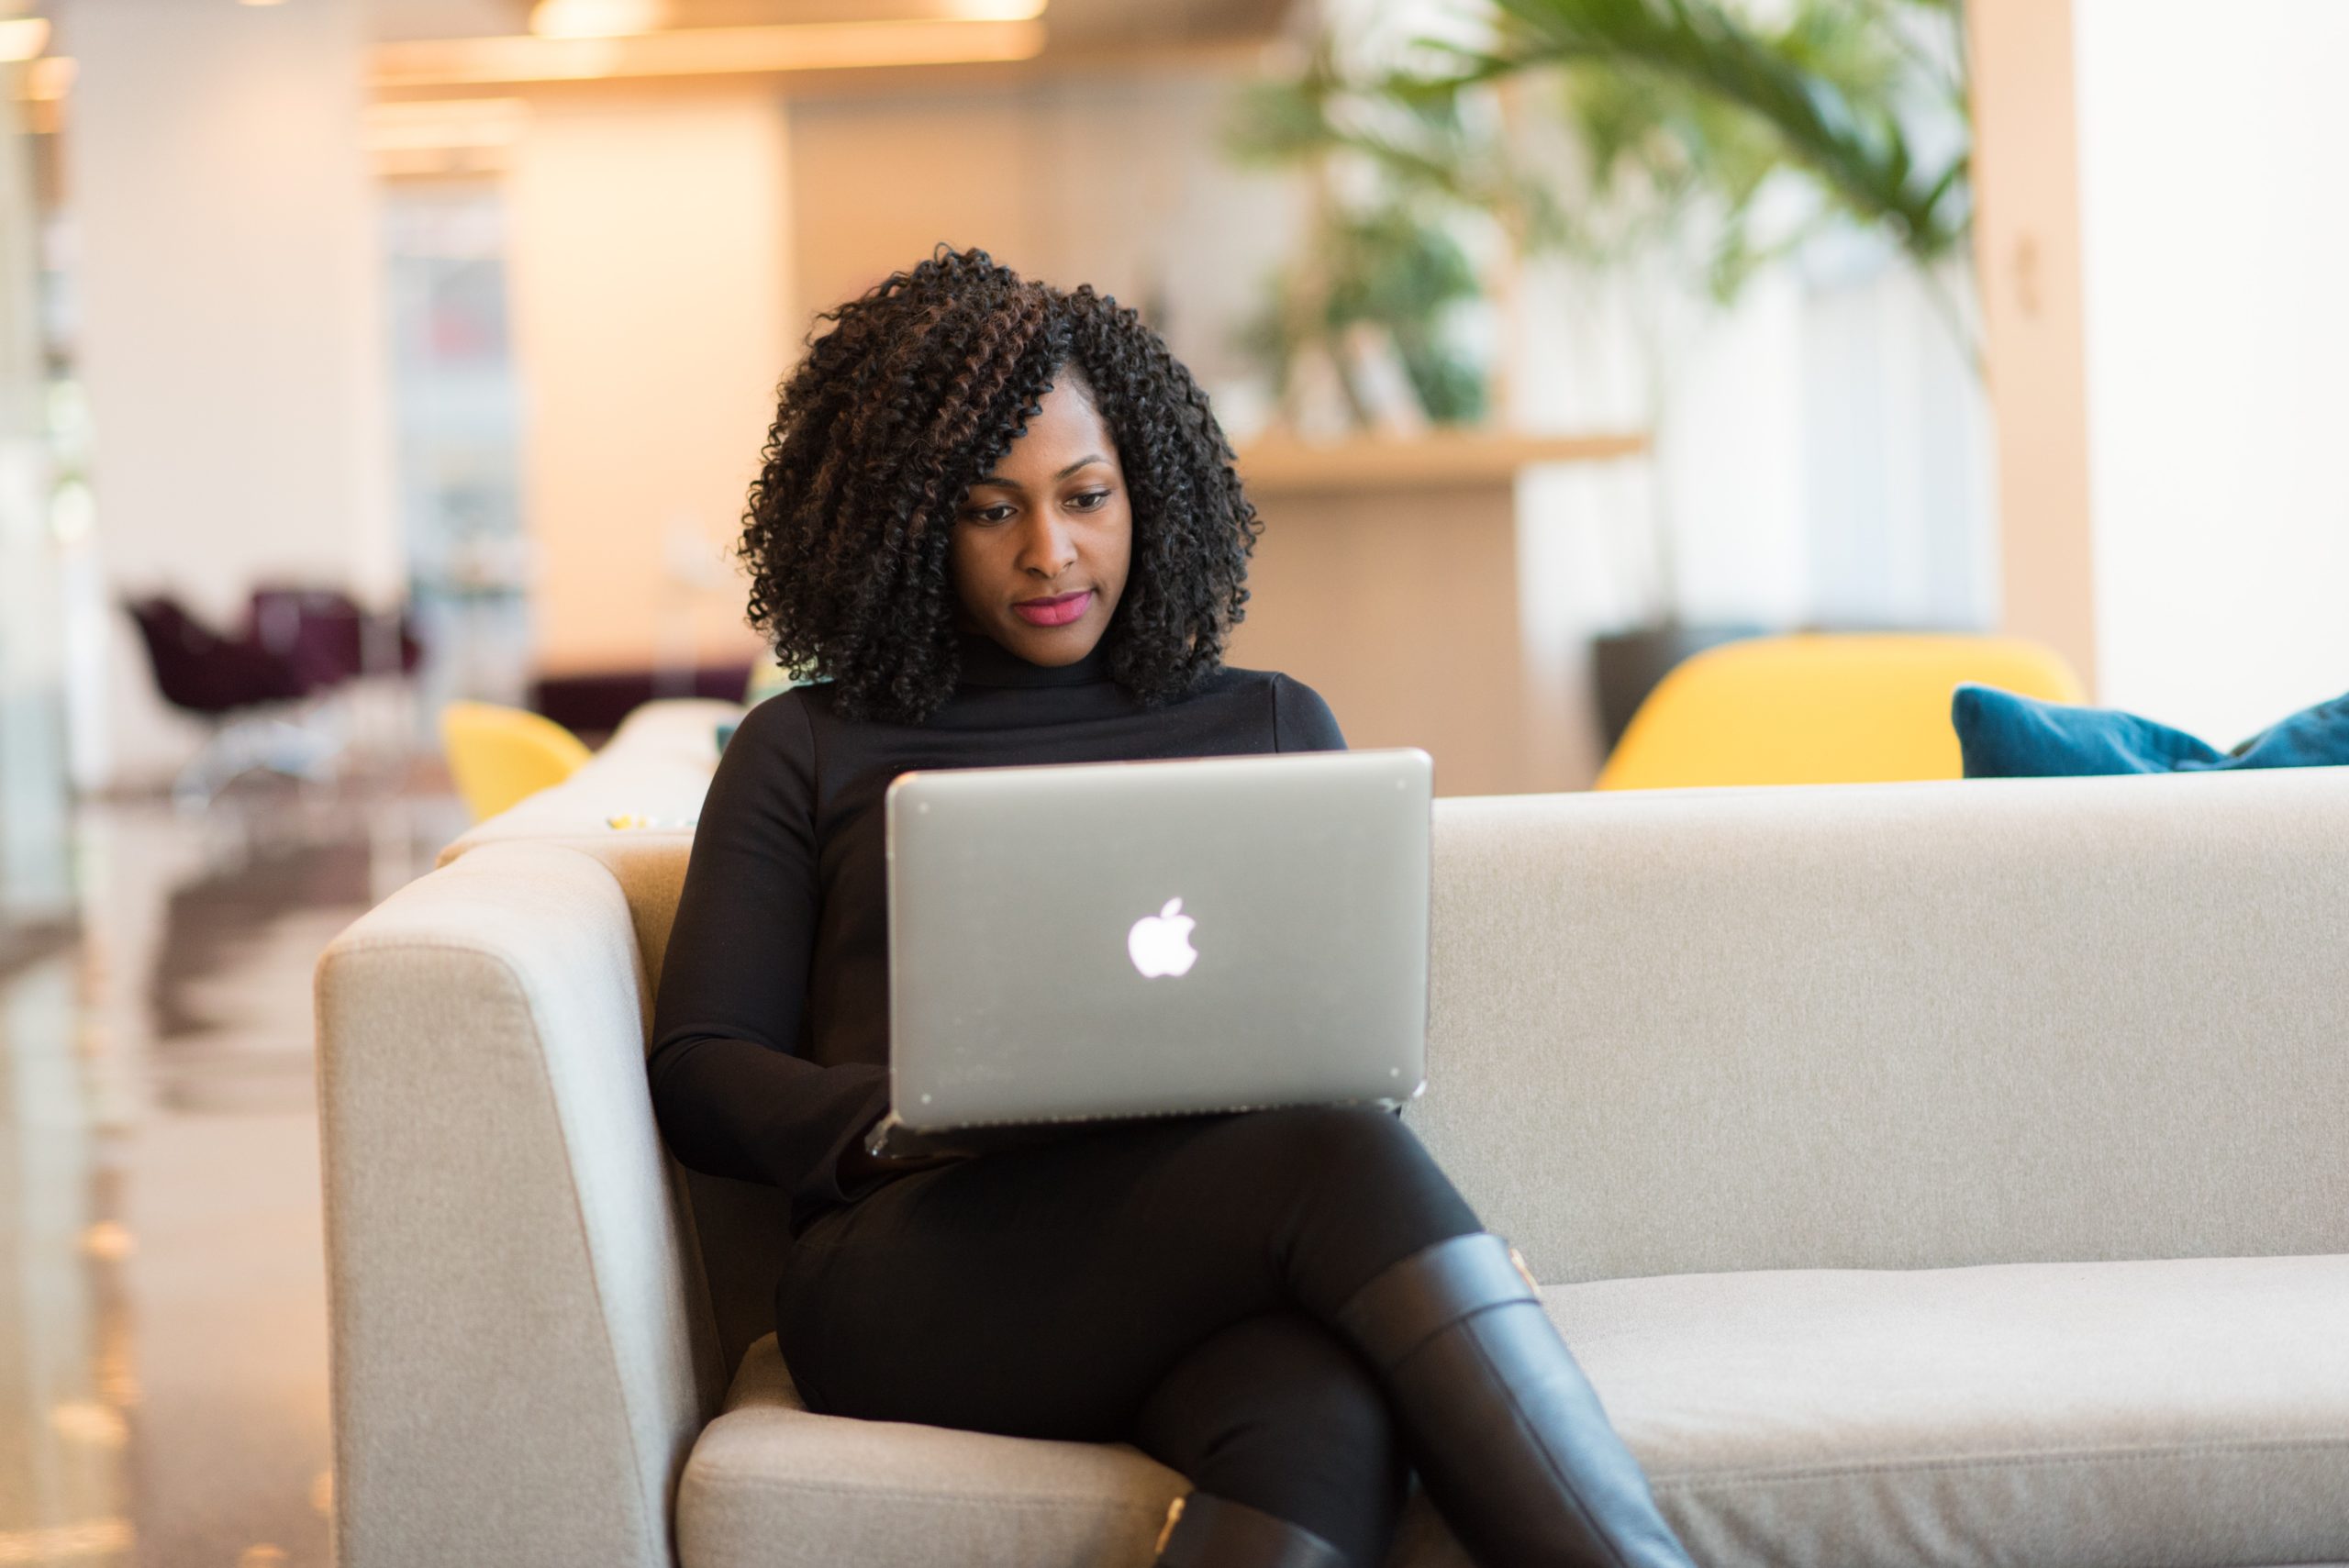 Corporate Black Women and the Struggle to Find Love